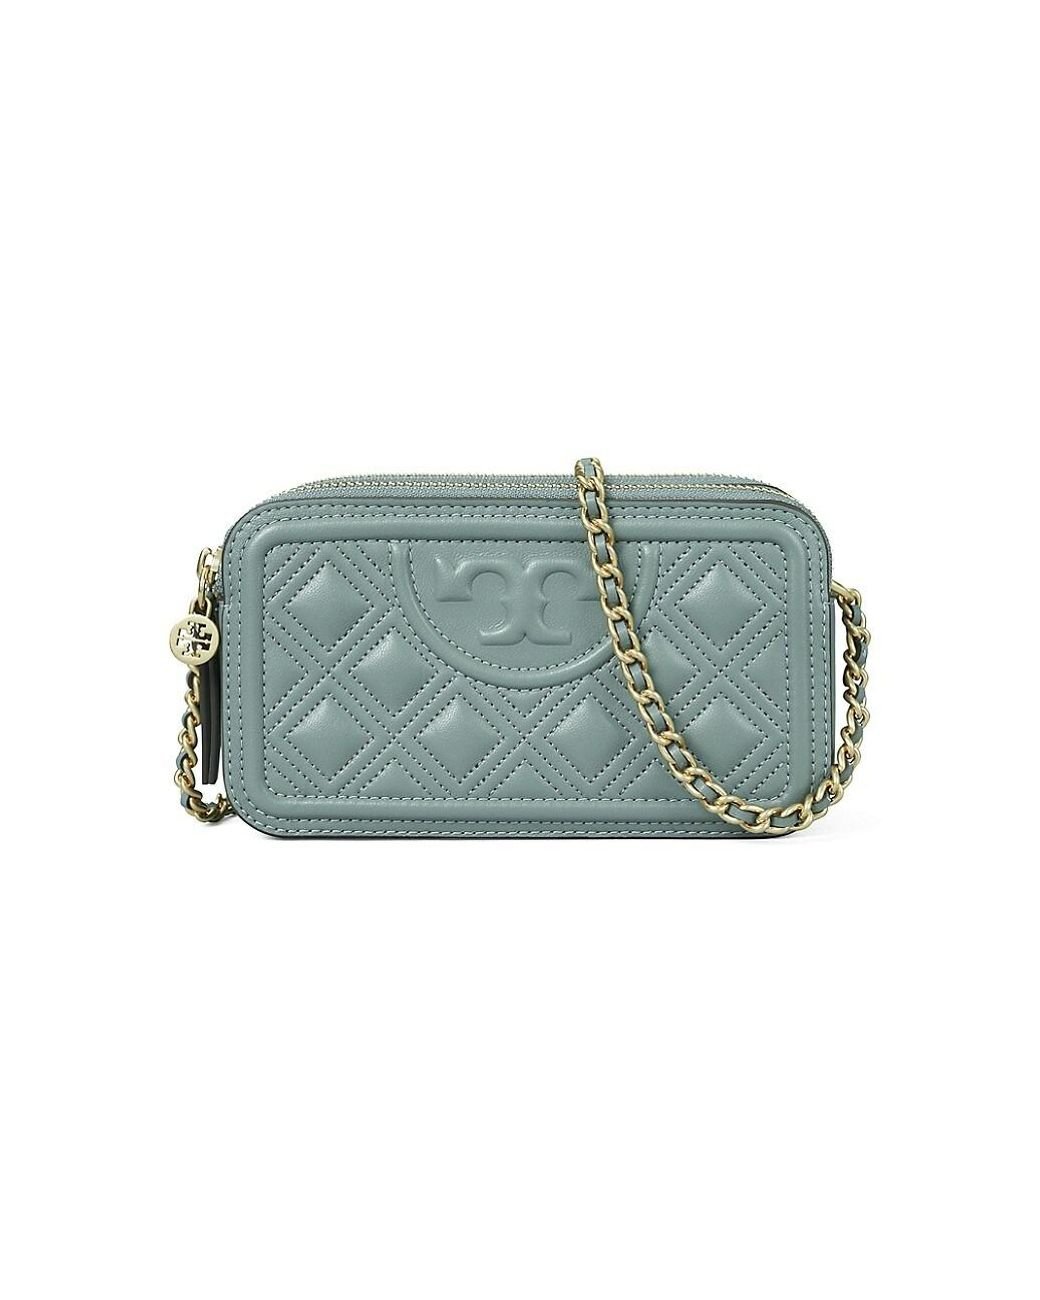 Tory Burch Fleming Quilted Leather Mini Shoulder Bag in Green